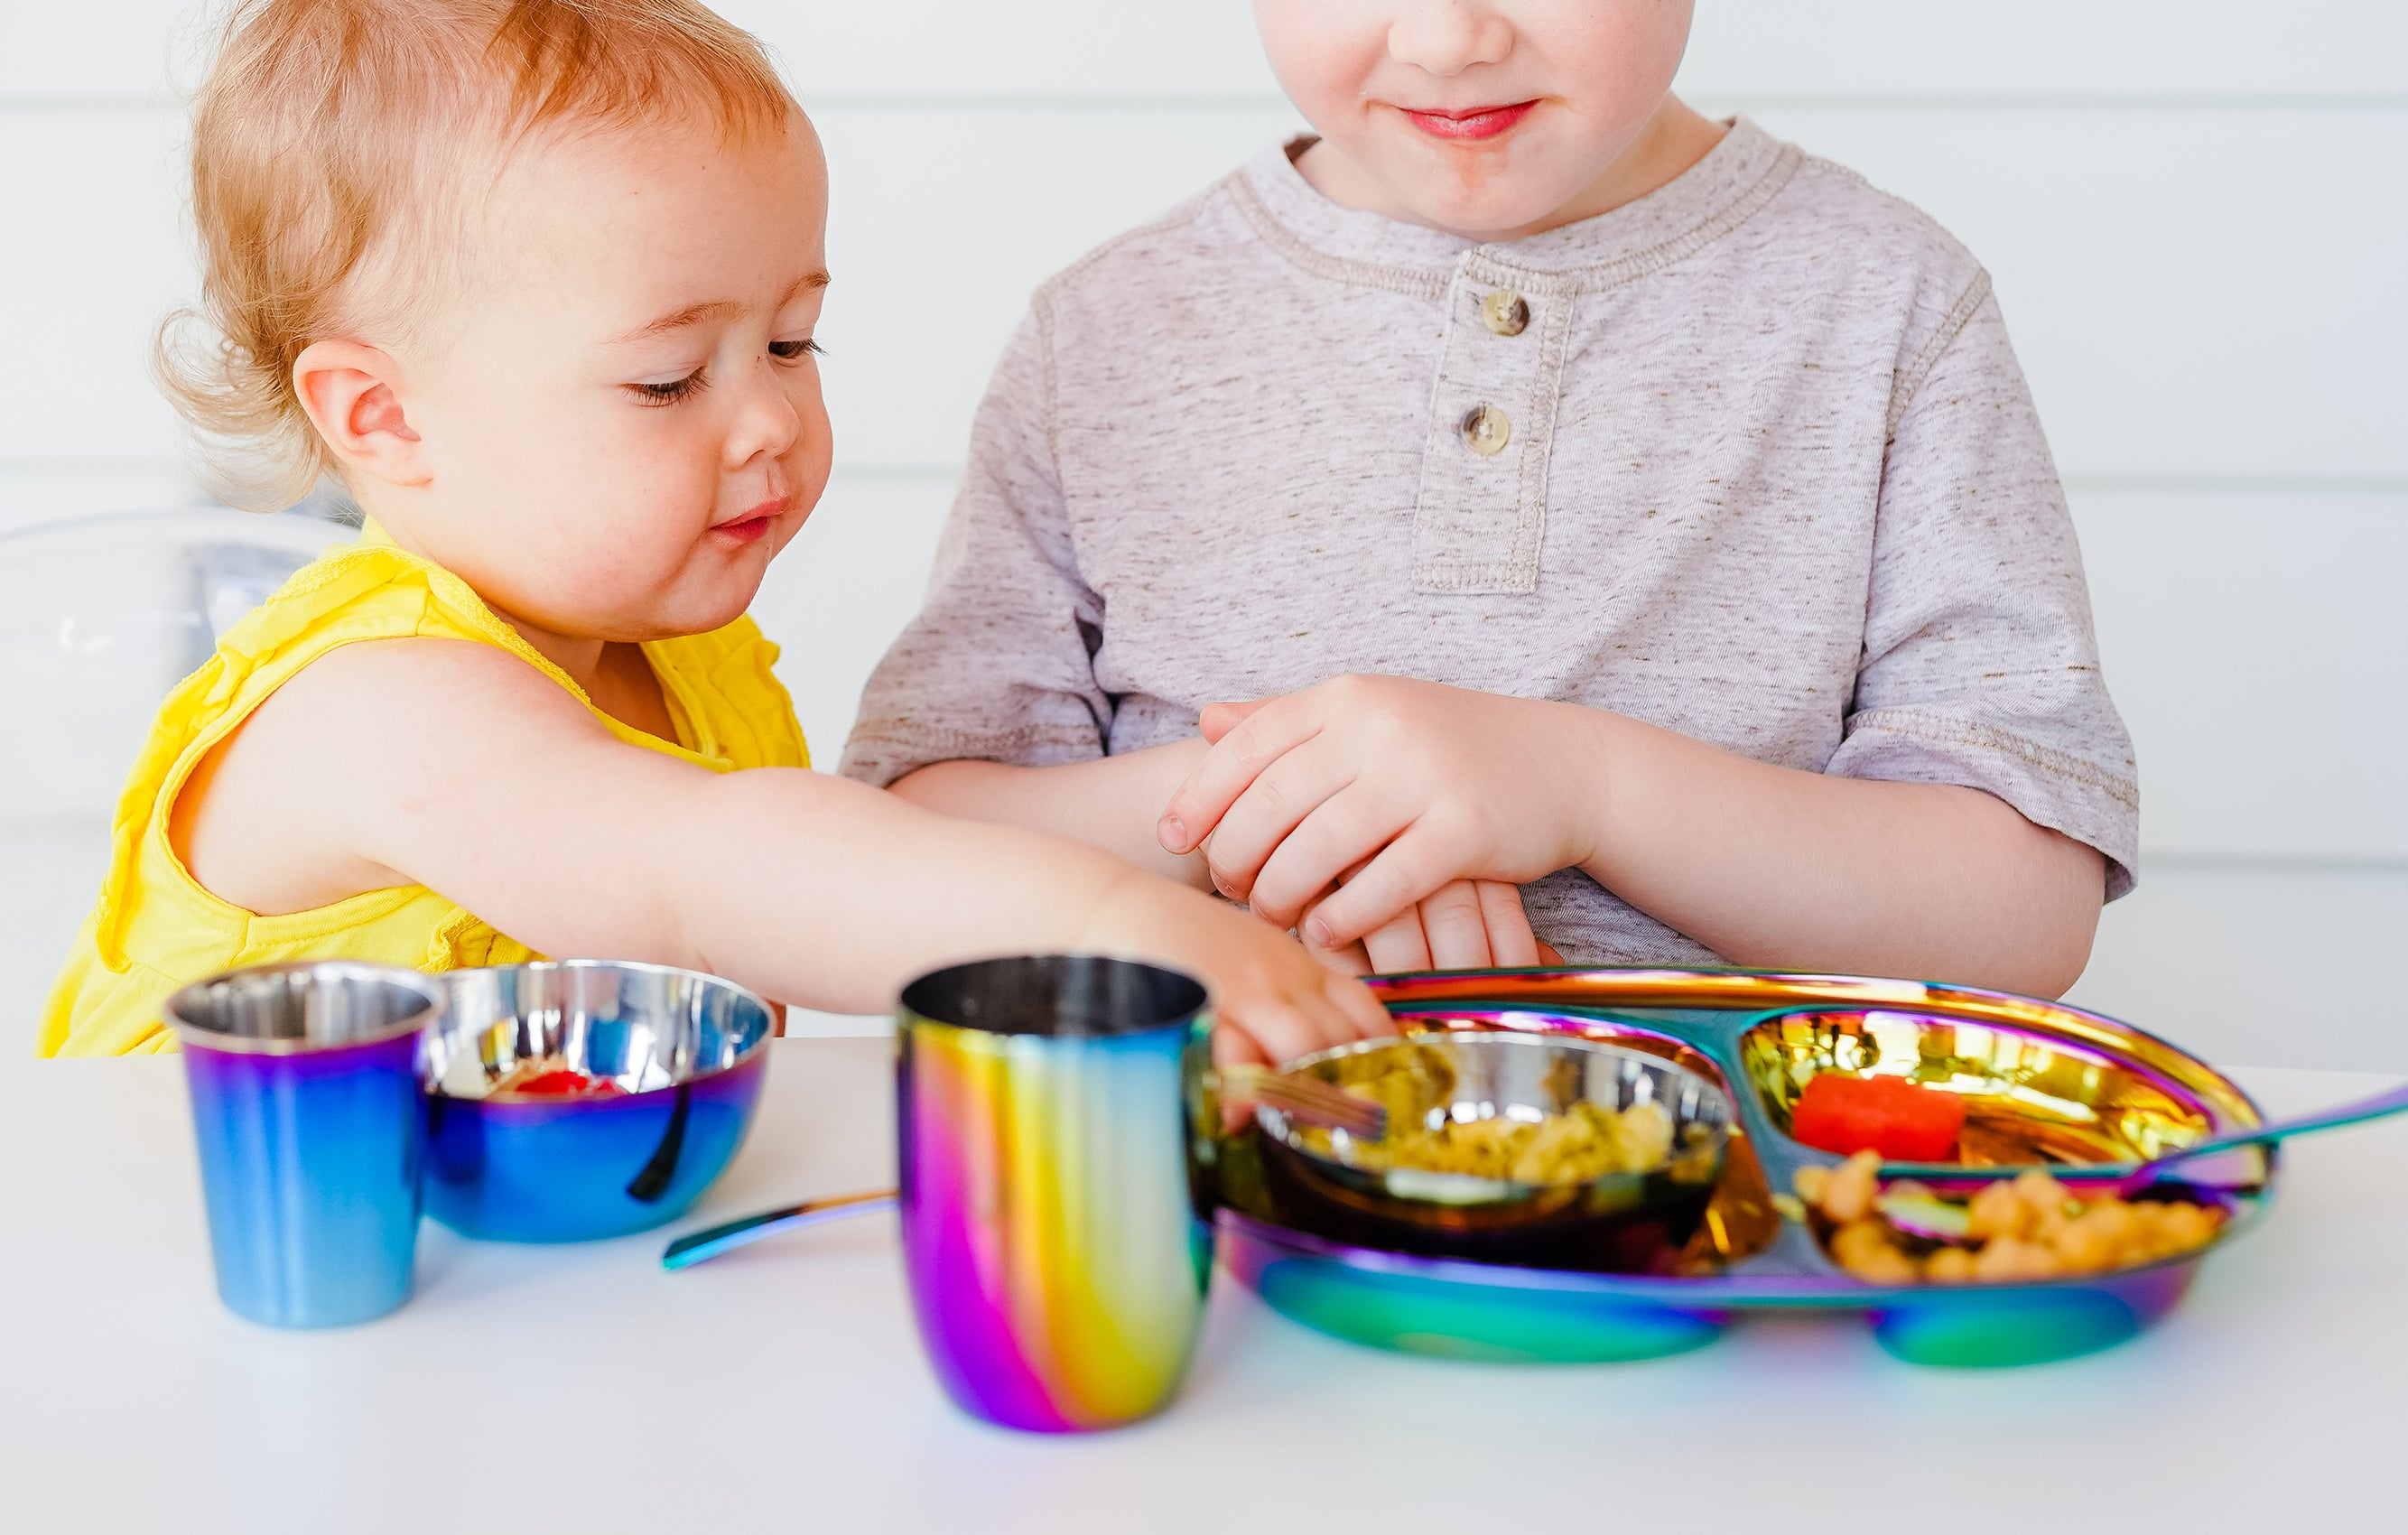 Ahimsa - Stainless Steel Kids Dishes for Mindful Mealtime.